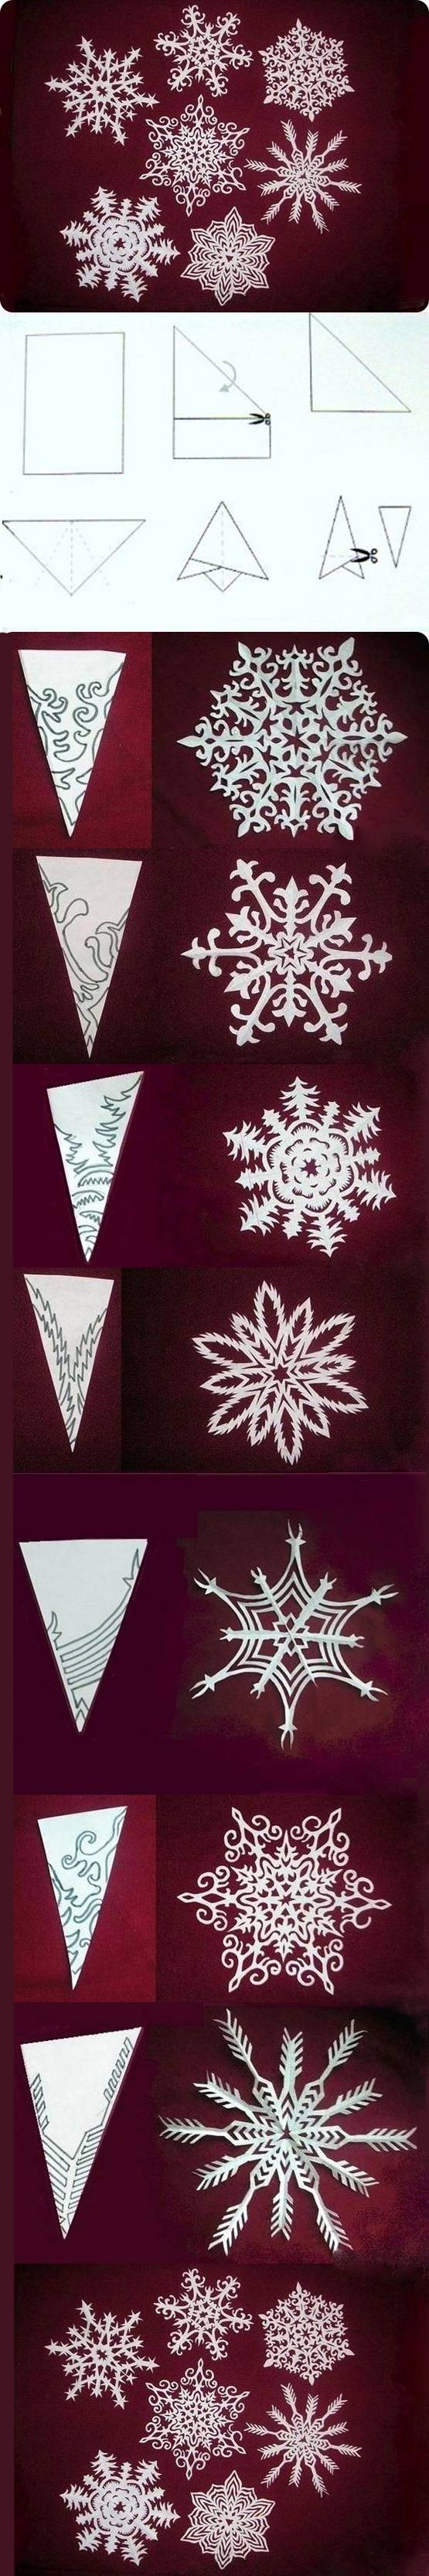 We Are Adding a New Christmas Design: Paper Snowflake ...